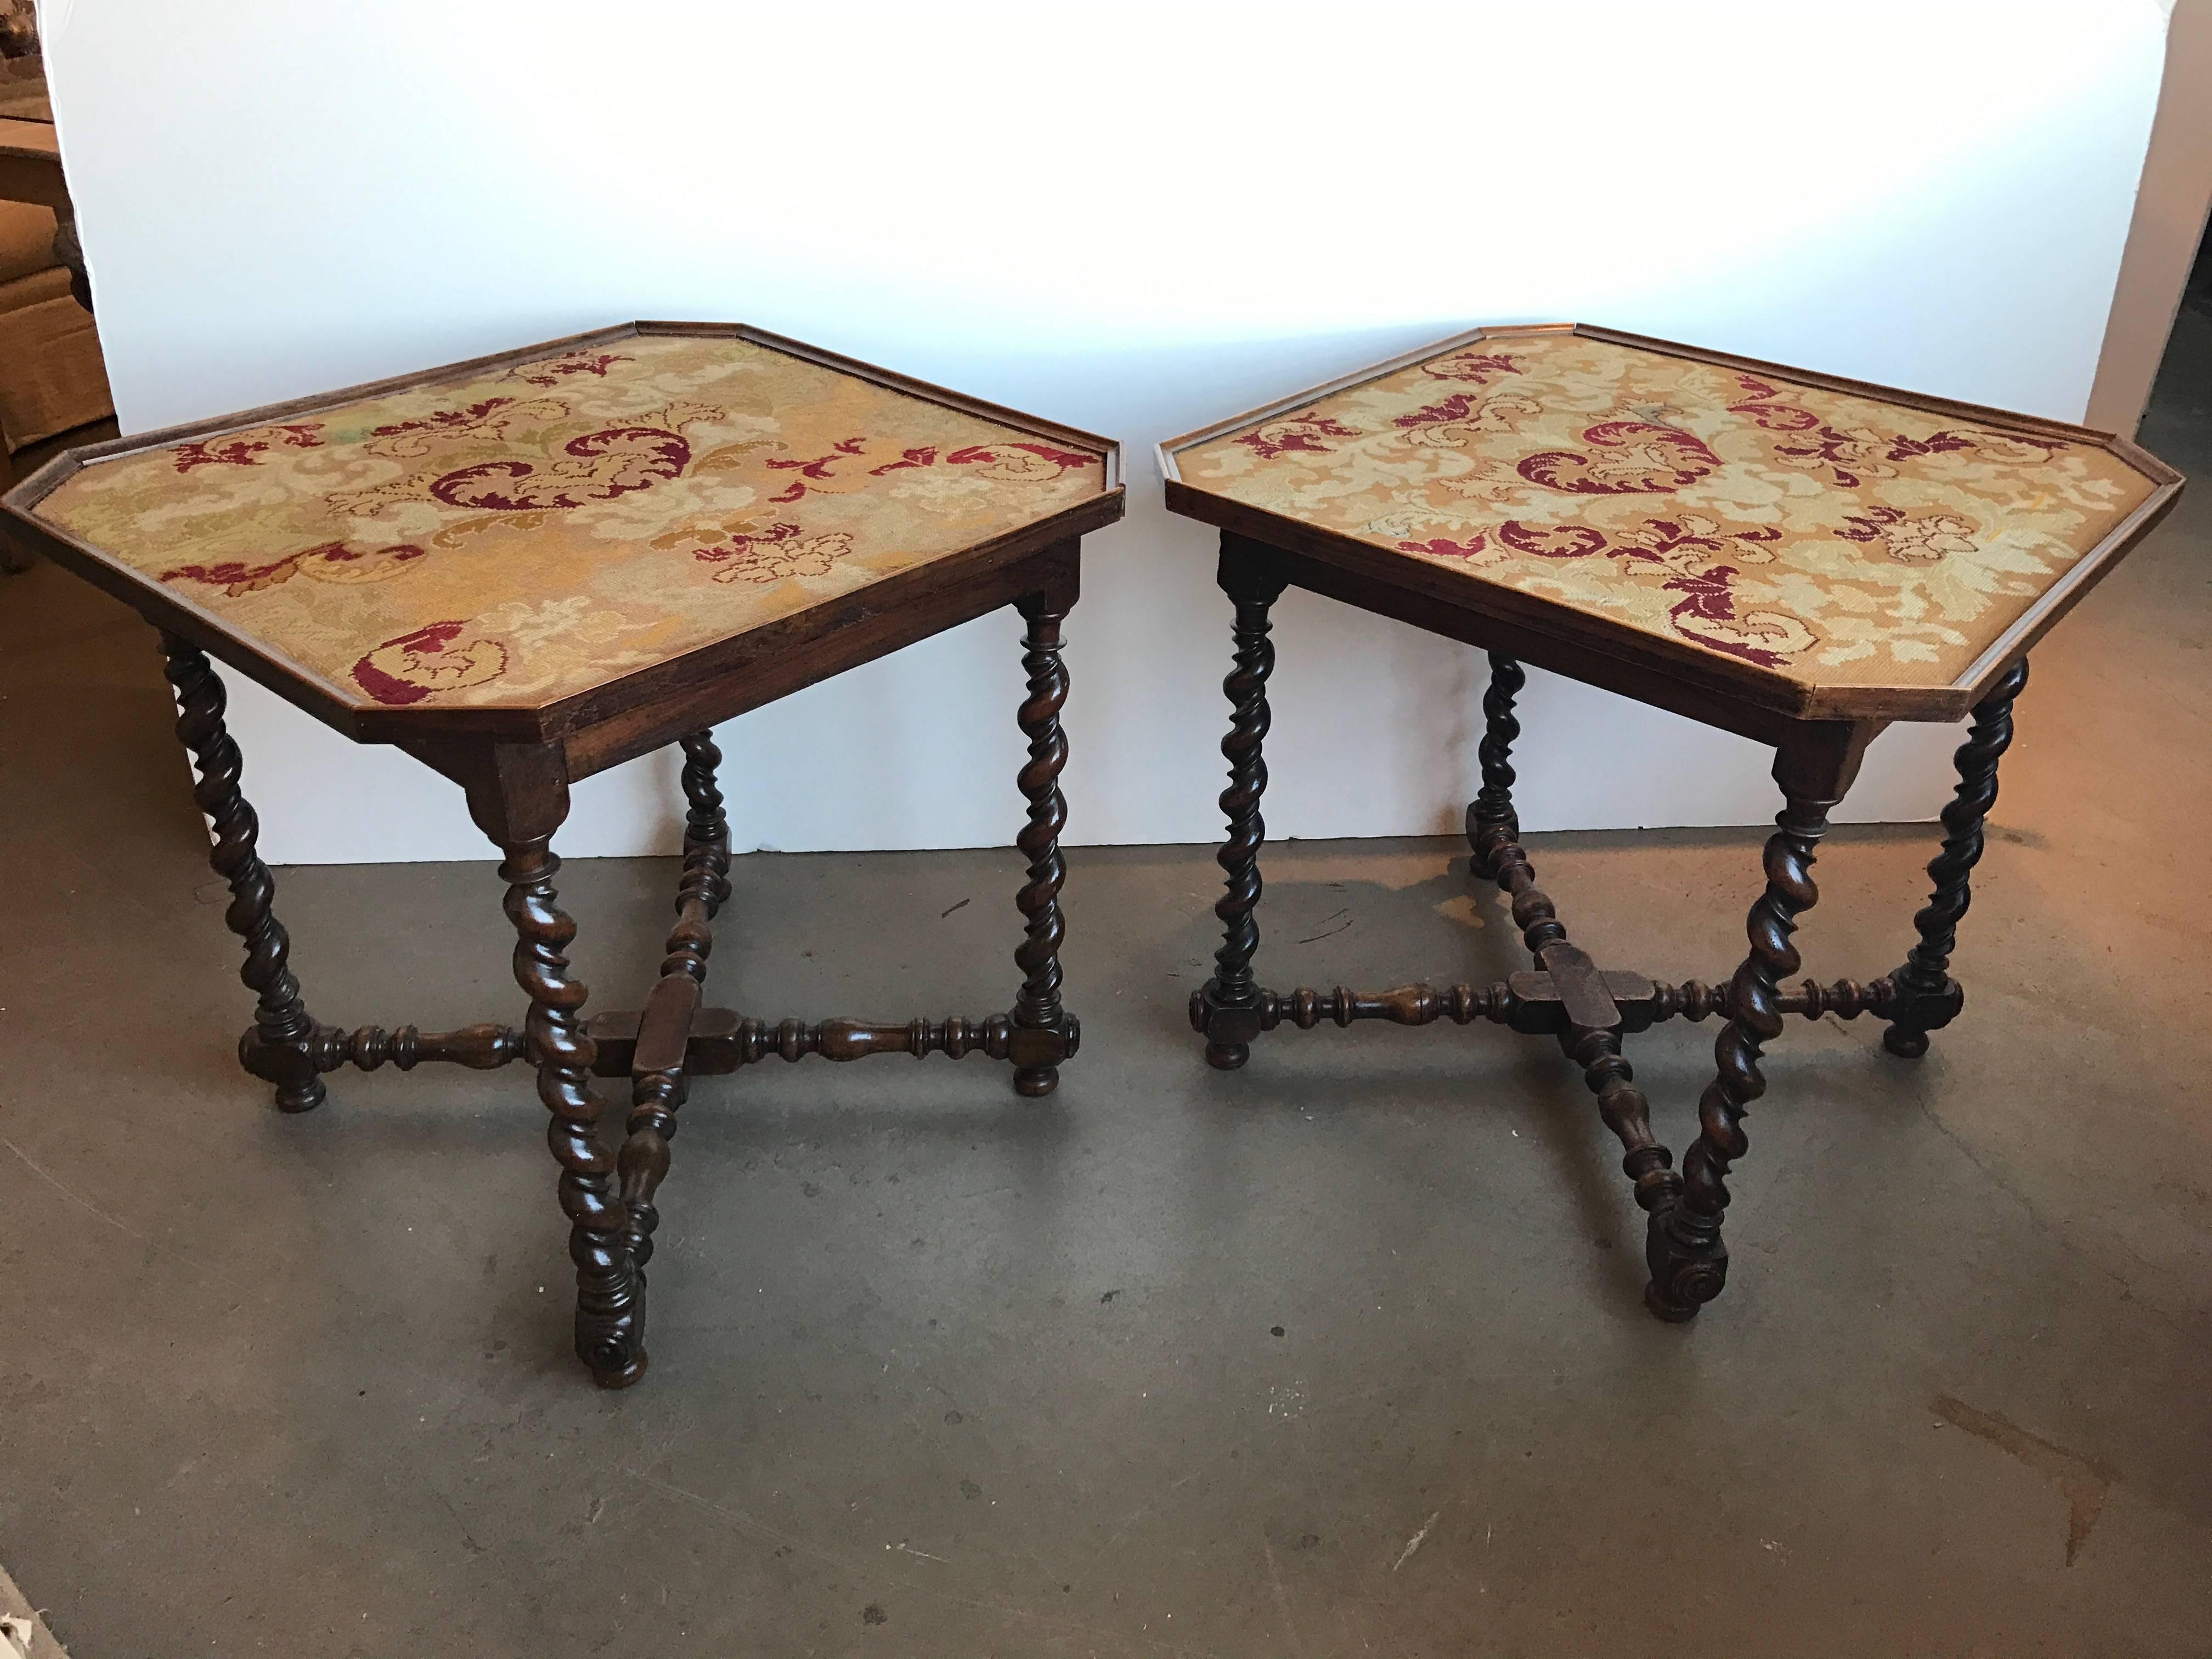 Pair of 19th century French needlepoint top tables. Both have custom sized glass tops (not photographed b/c of glare).

Measures: Table 1 31